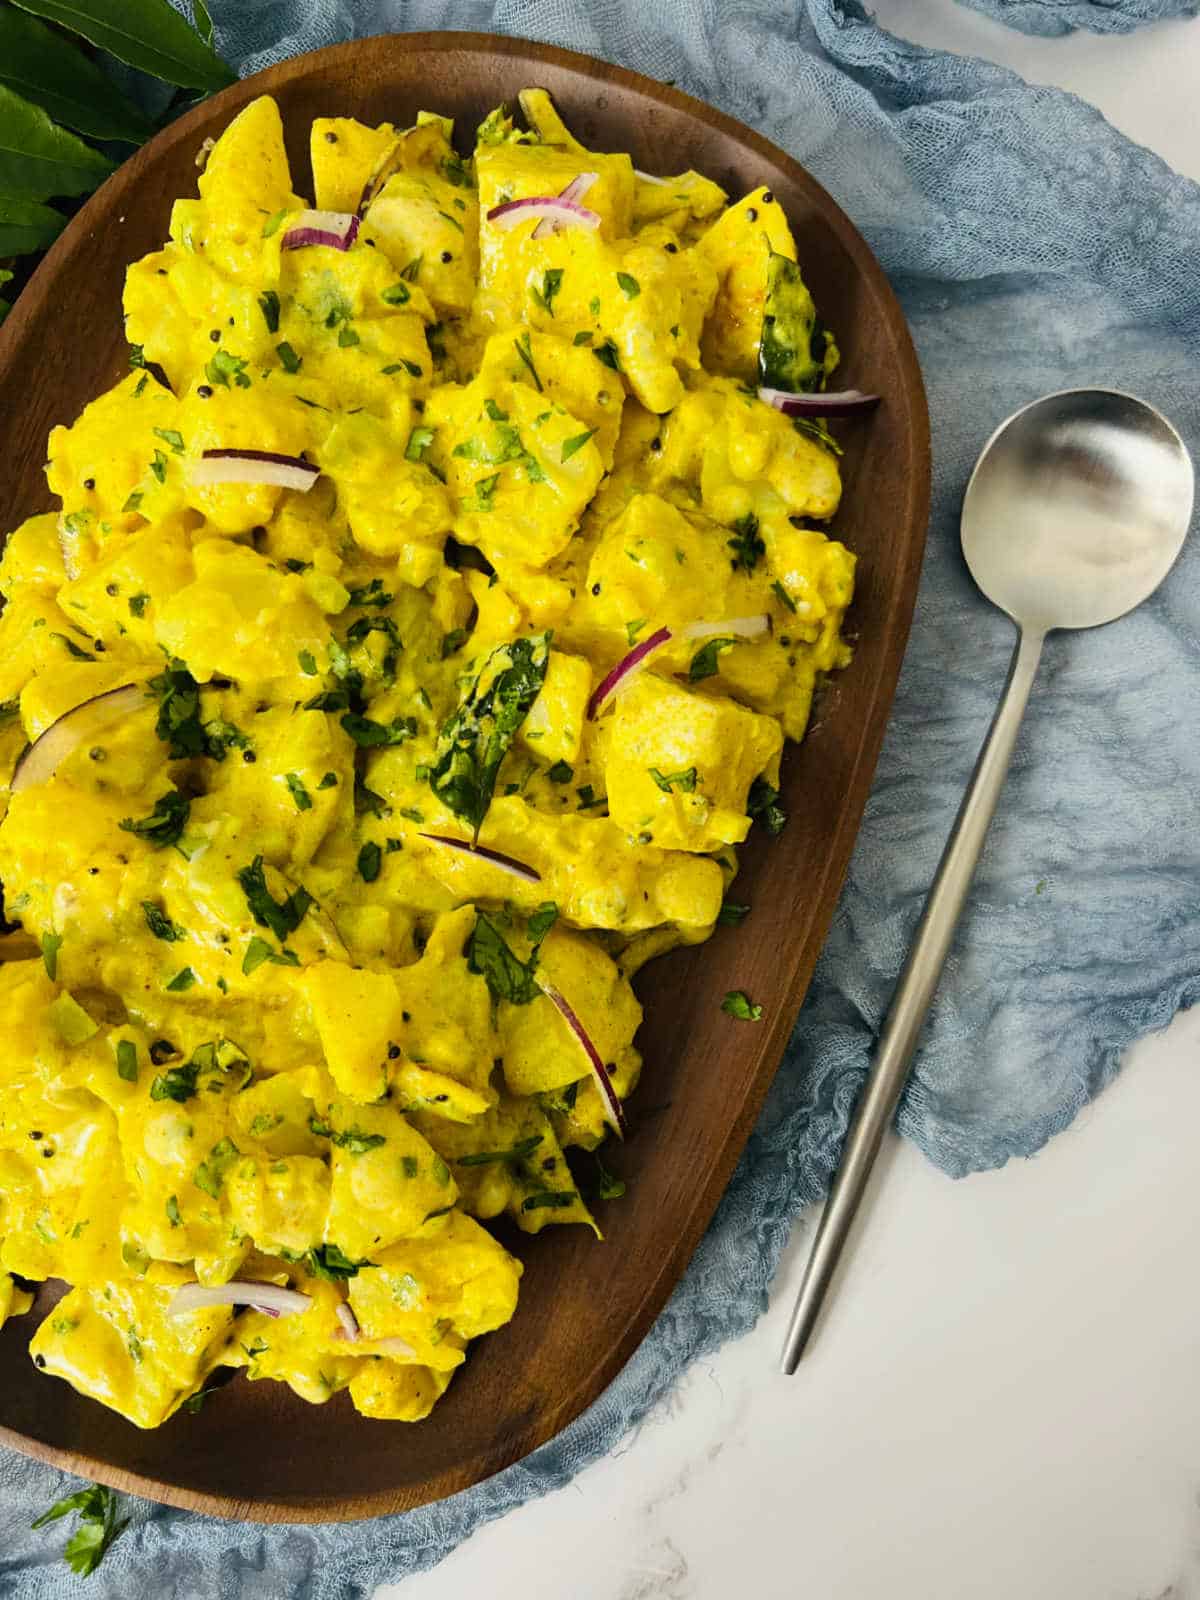 Curried potato salad served on a wooden plate.